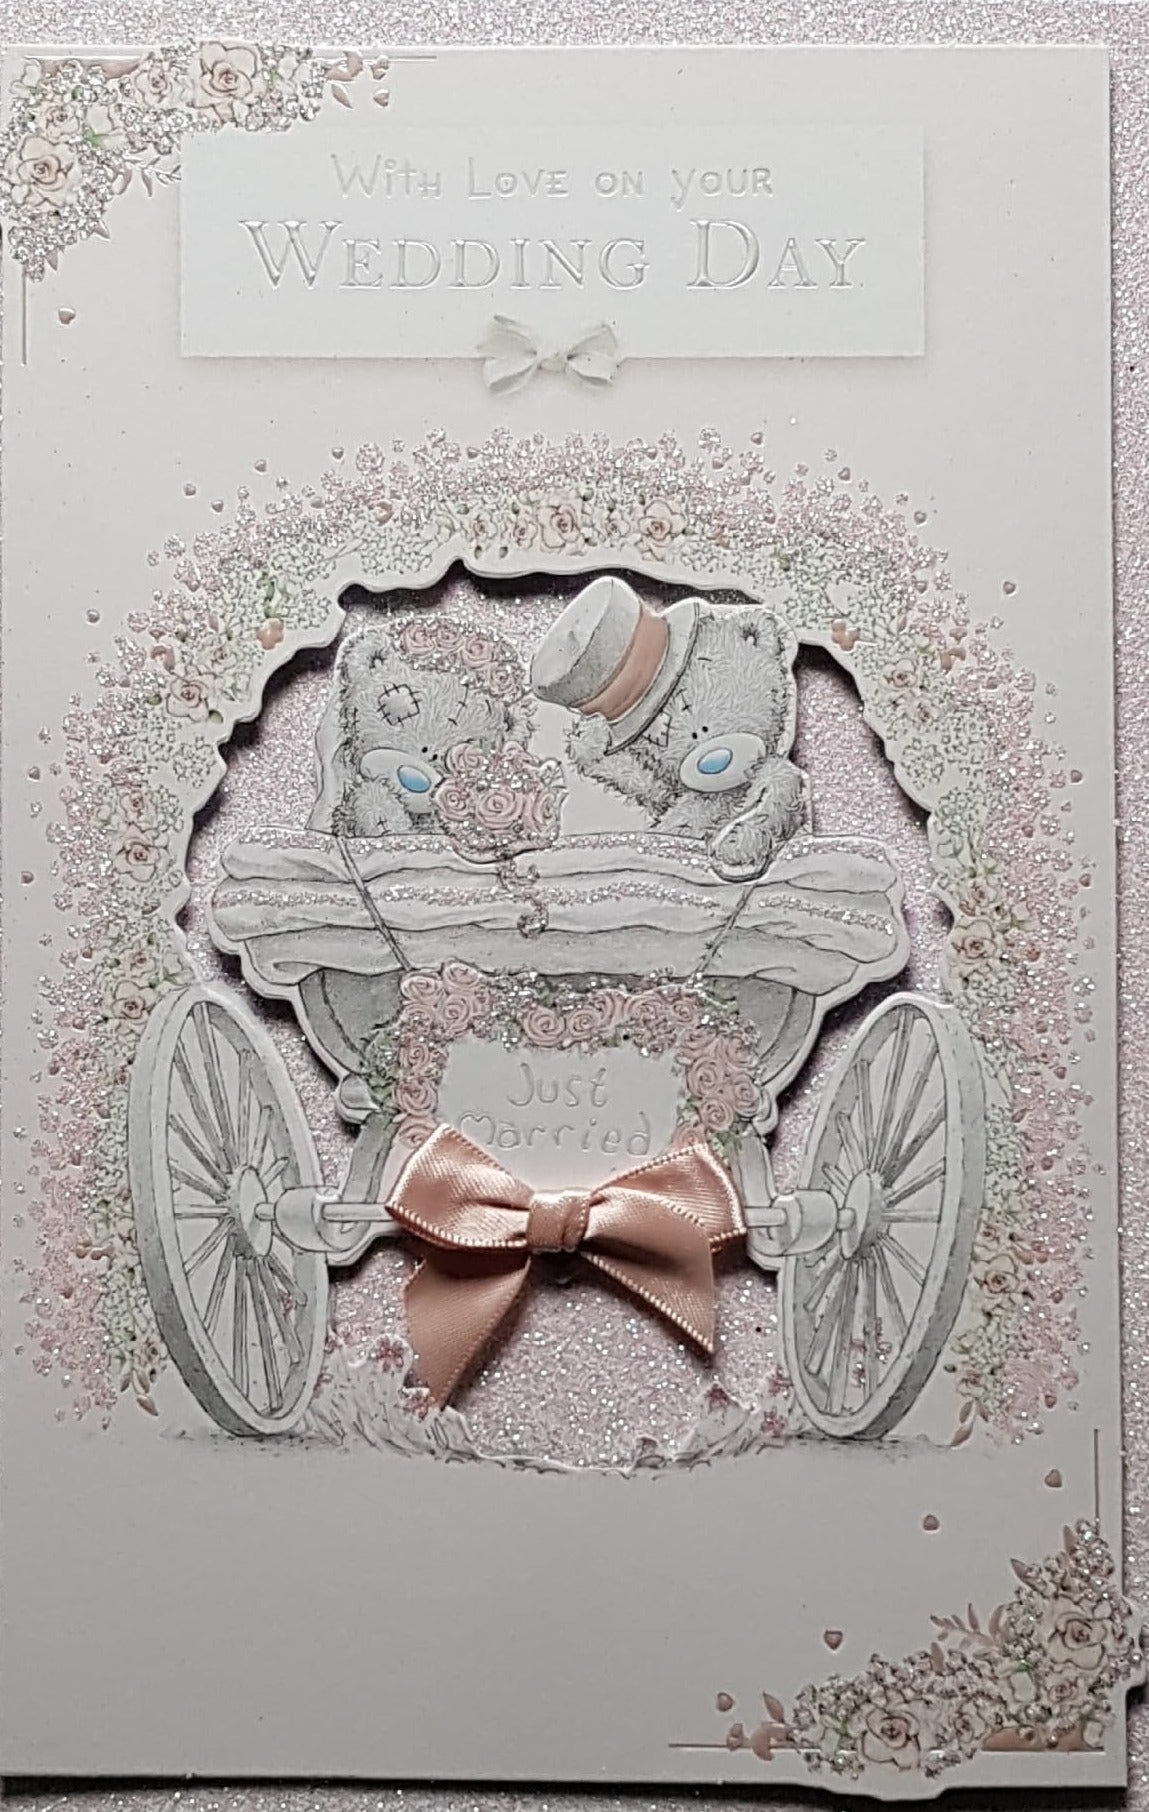 Wedding Card - A Teddy Couple In A Sparkly Carriage & 'Just Married'